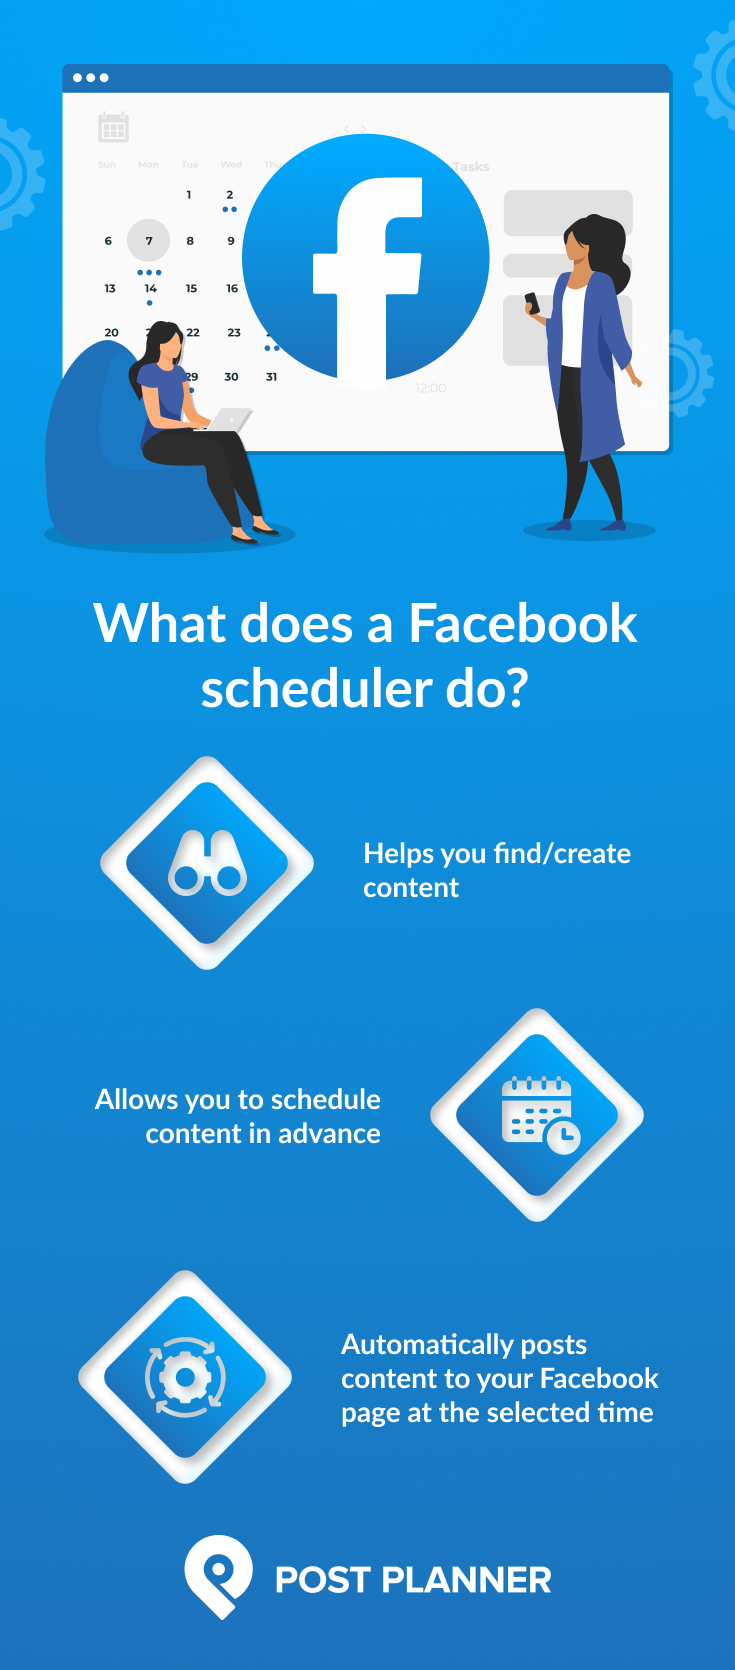 What does a Facebook scheduler do?